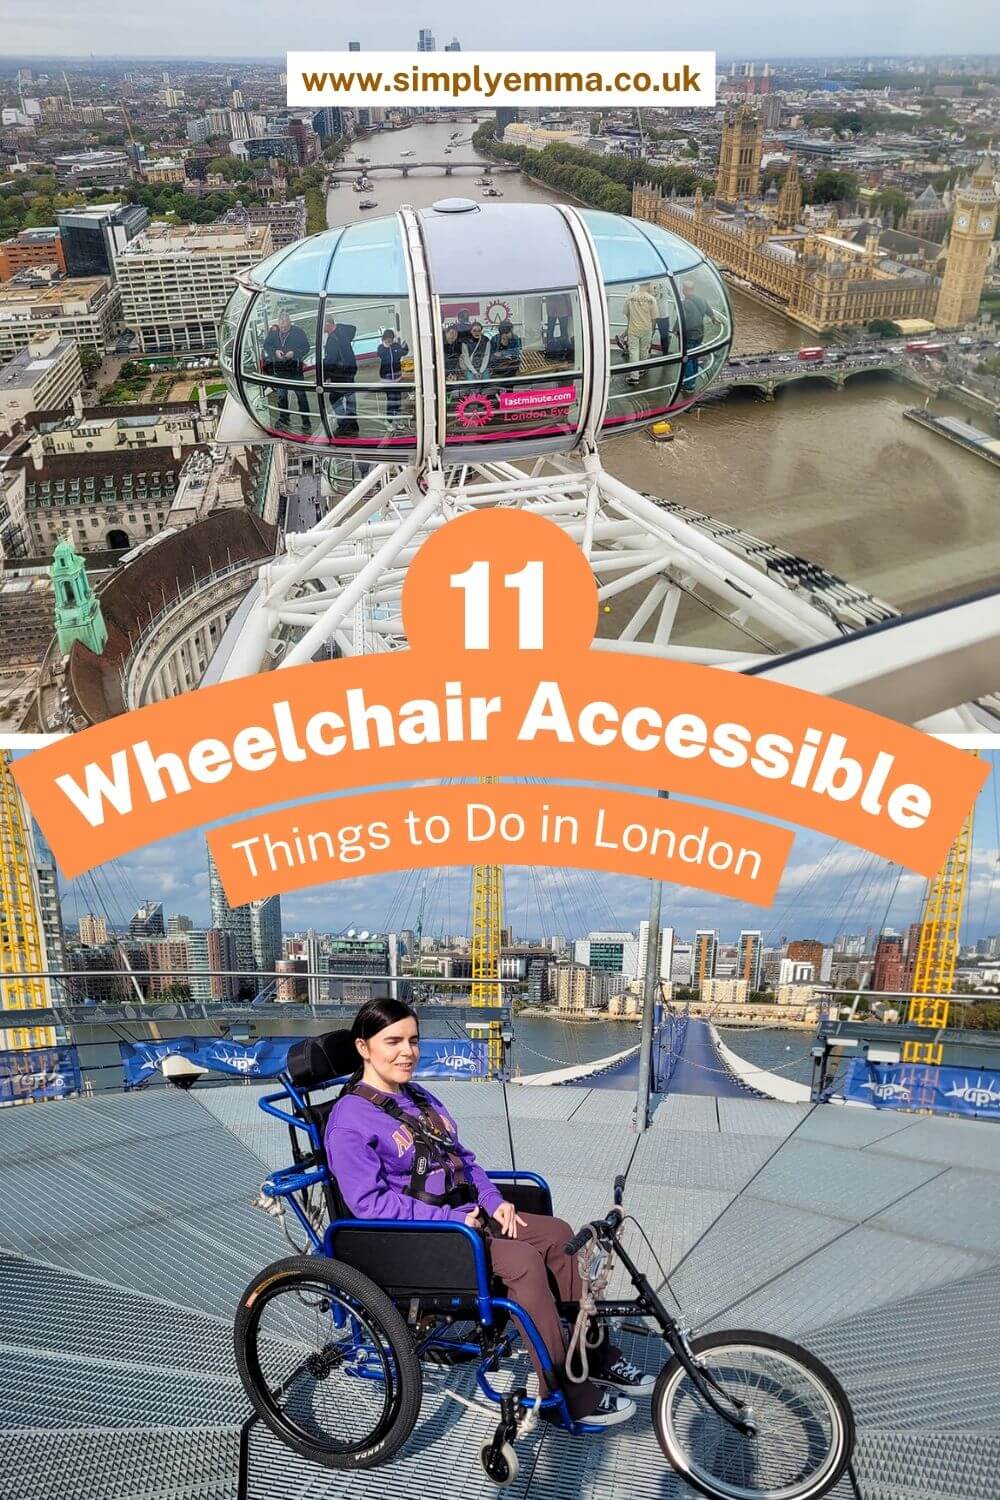 Pinterest image showing a view of the river Thames, Westminster and a pod from the top of the London Eye.. Another image shows Emma is sitting in a manual wheelchair provided by Up at the O2 for the purpose of her O2 wheelchair climb. She is on the summit of the O2 roof with a spectacular view around her. Emma is wearing a purple sweatshirt and brown flared leggings. Emma is smiling. Text over the image reads "11 Wheelchair Accessible Things to Do in London"